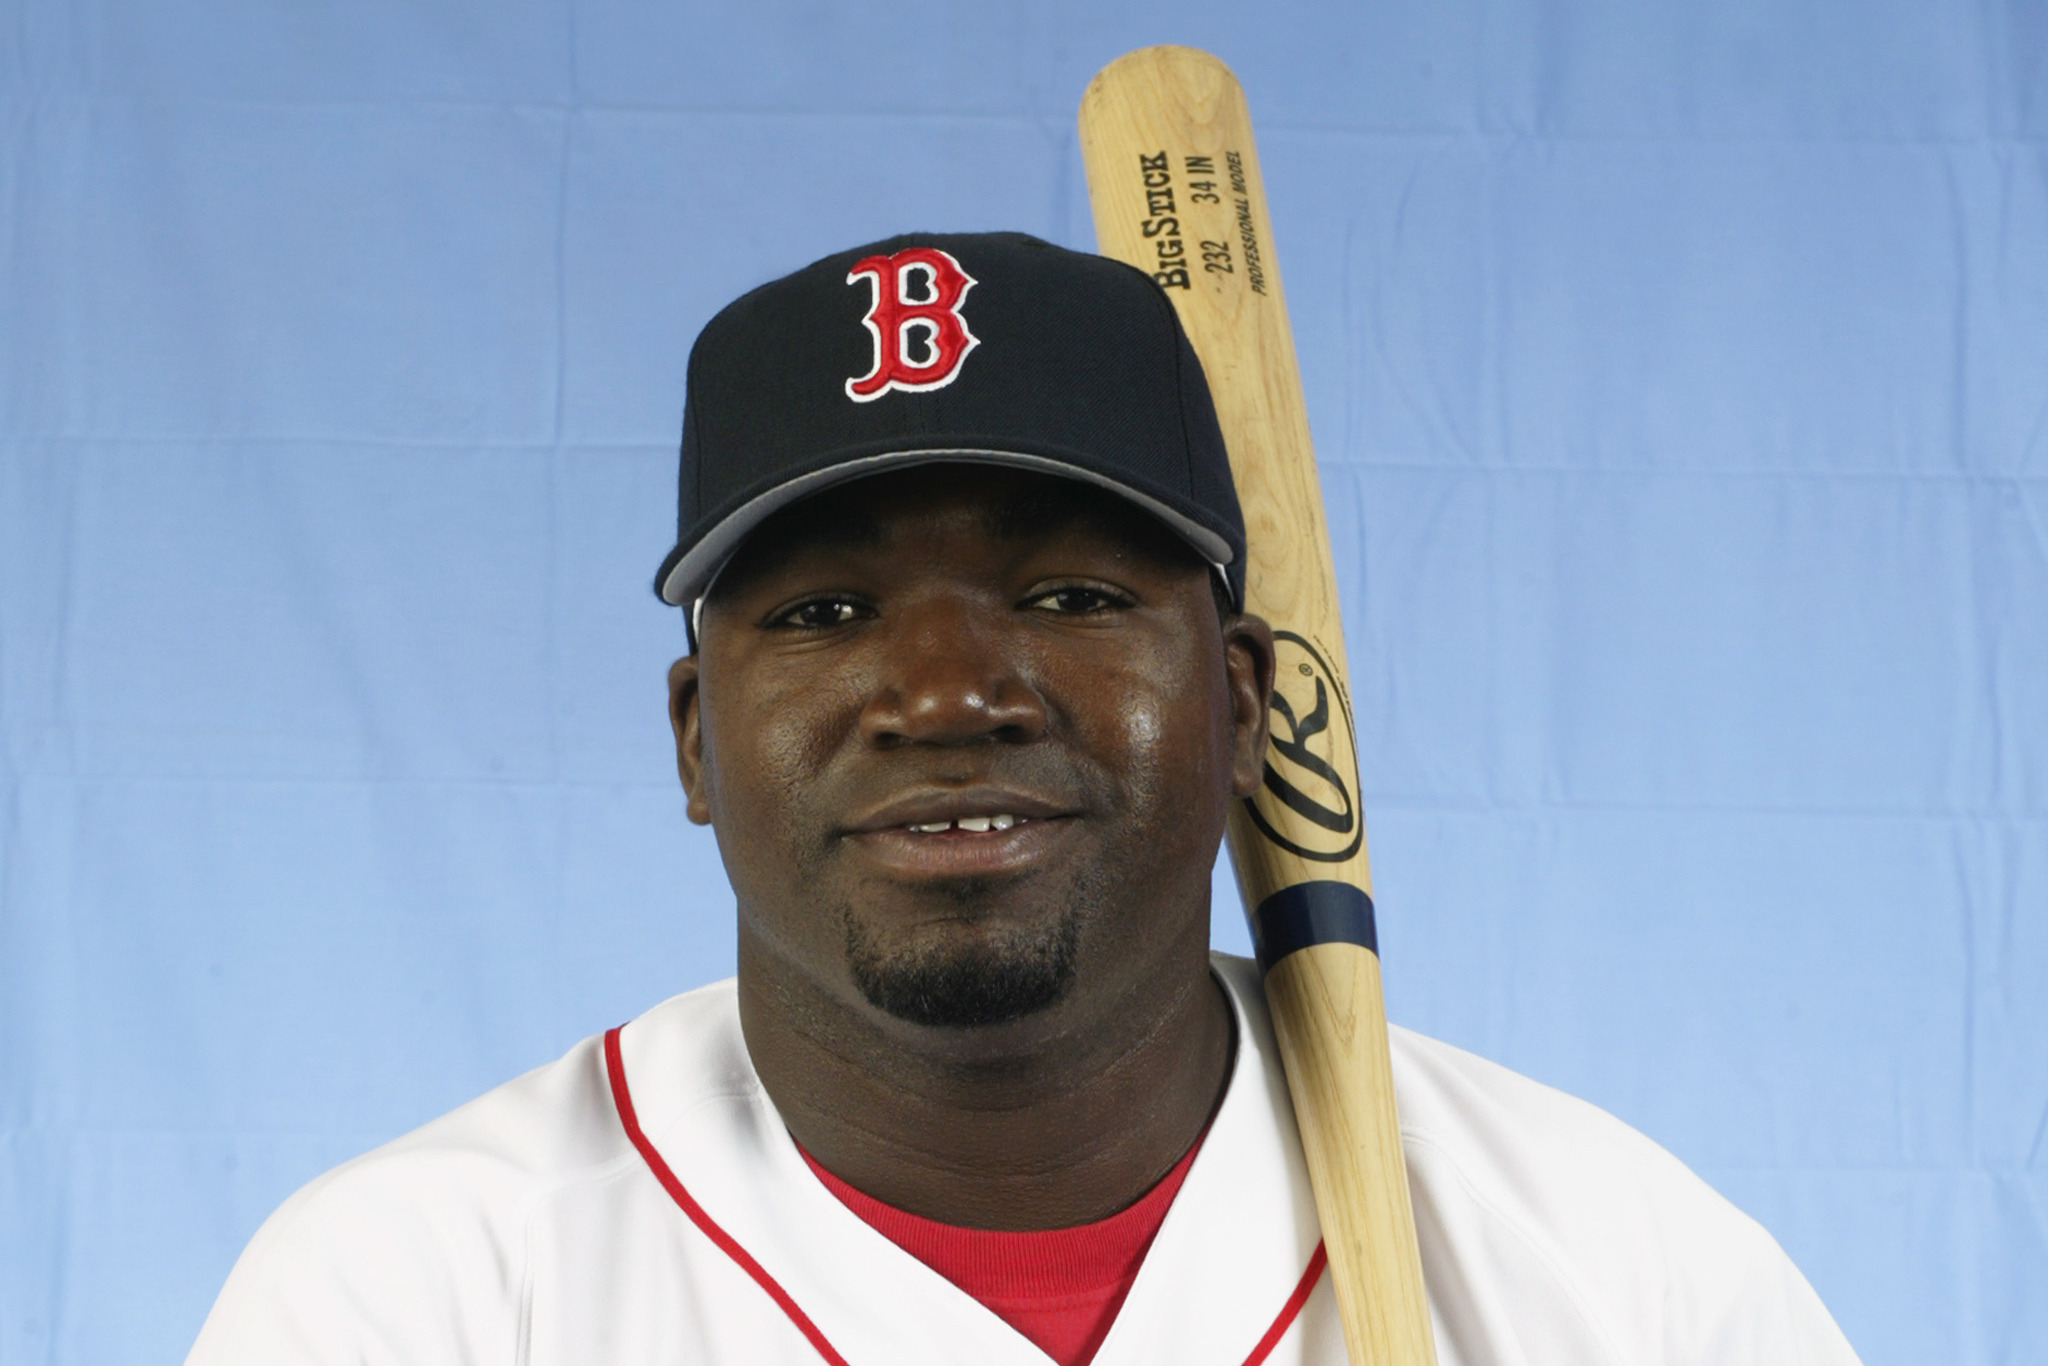 David Ortiz is a big hit with patients at MassGeneral Hospital for Children